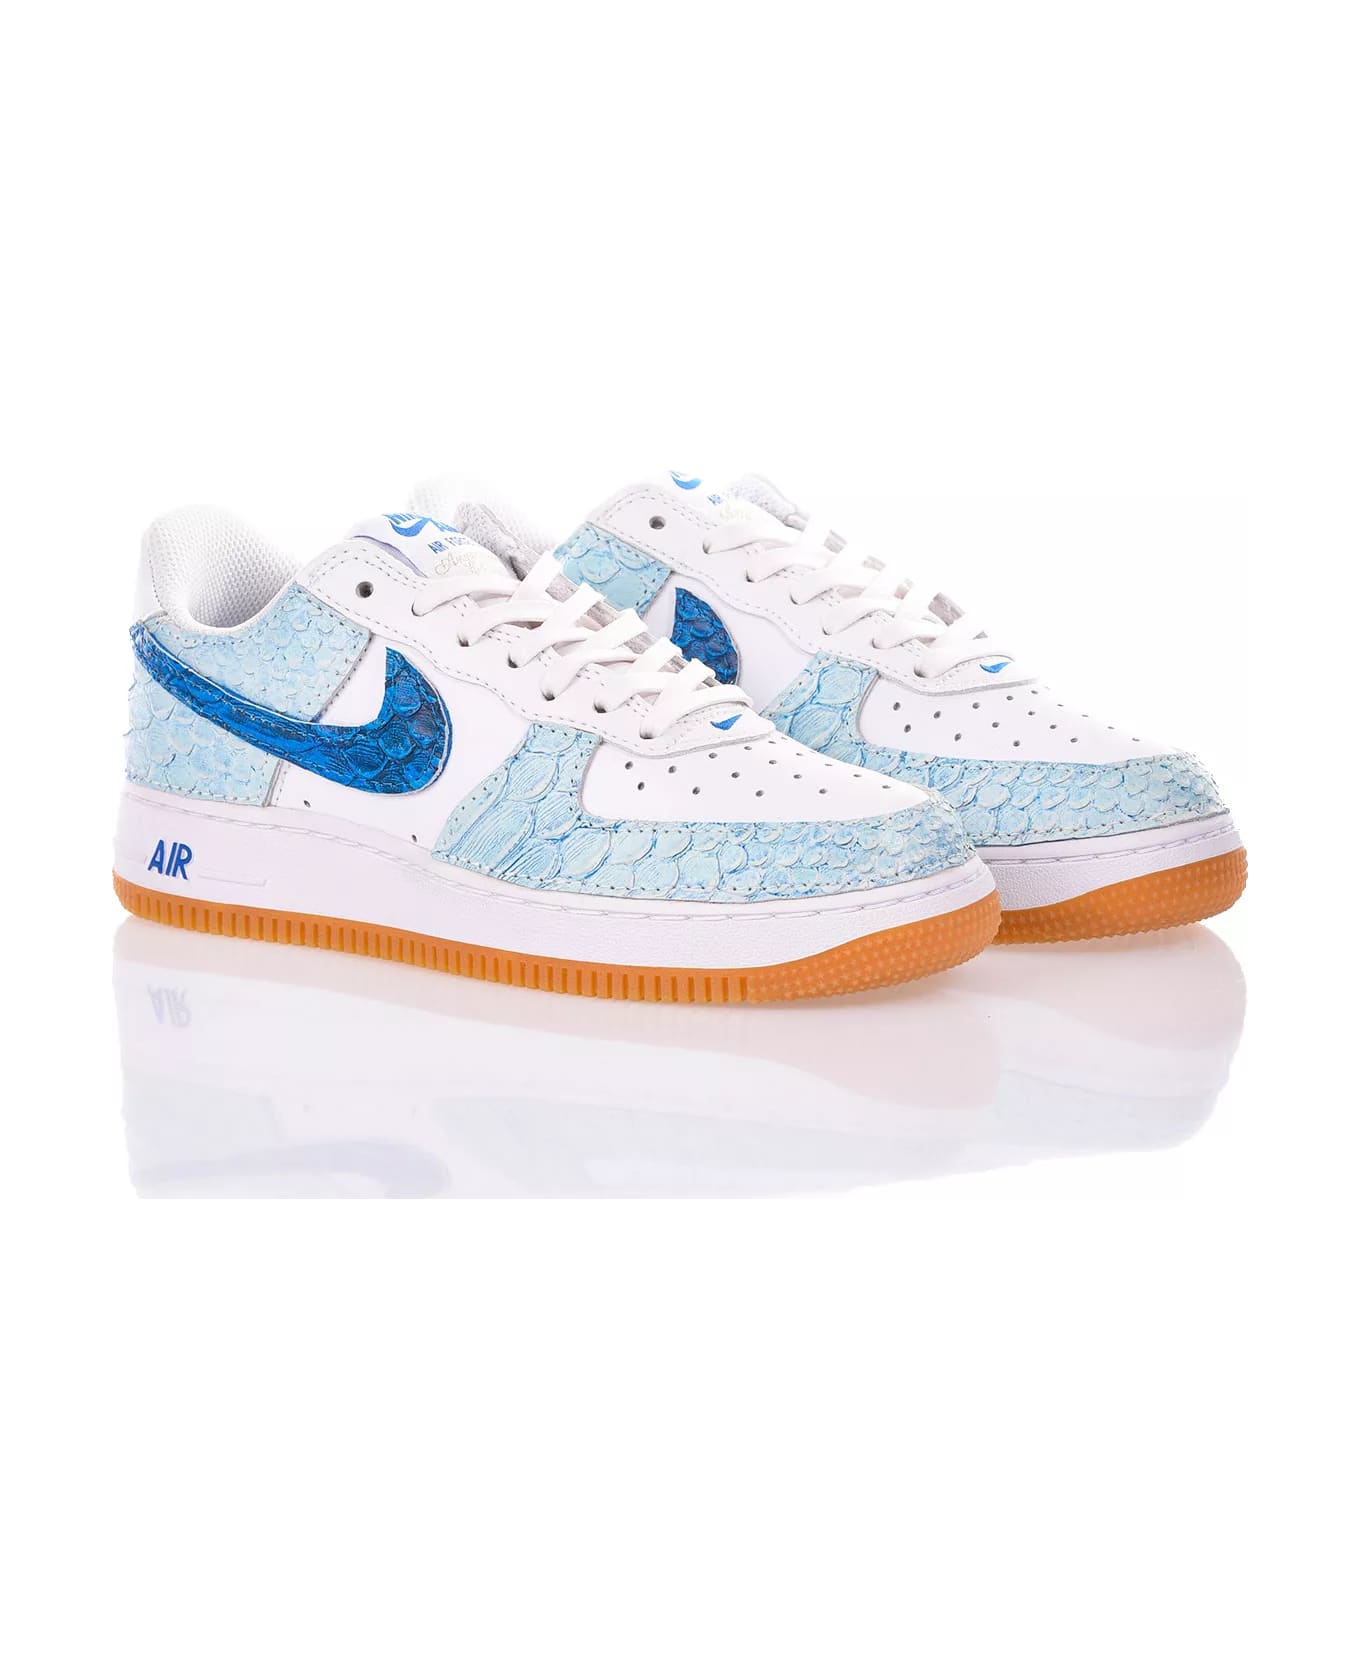 Mimanera Nike Air Force 1 Celestial With Blue Swoosh